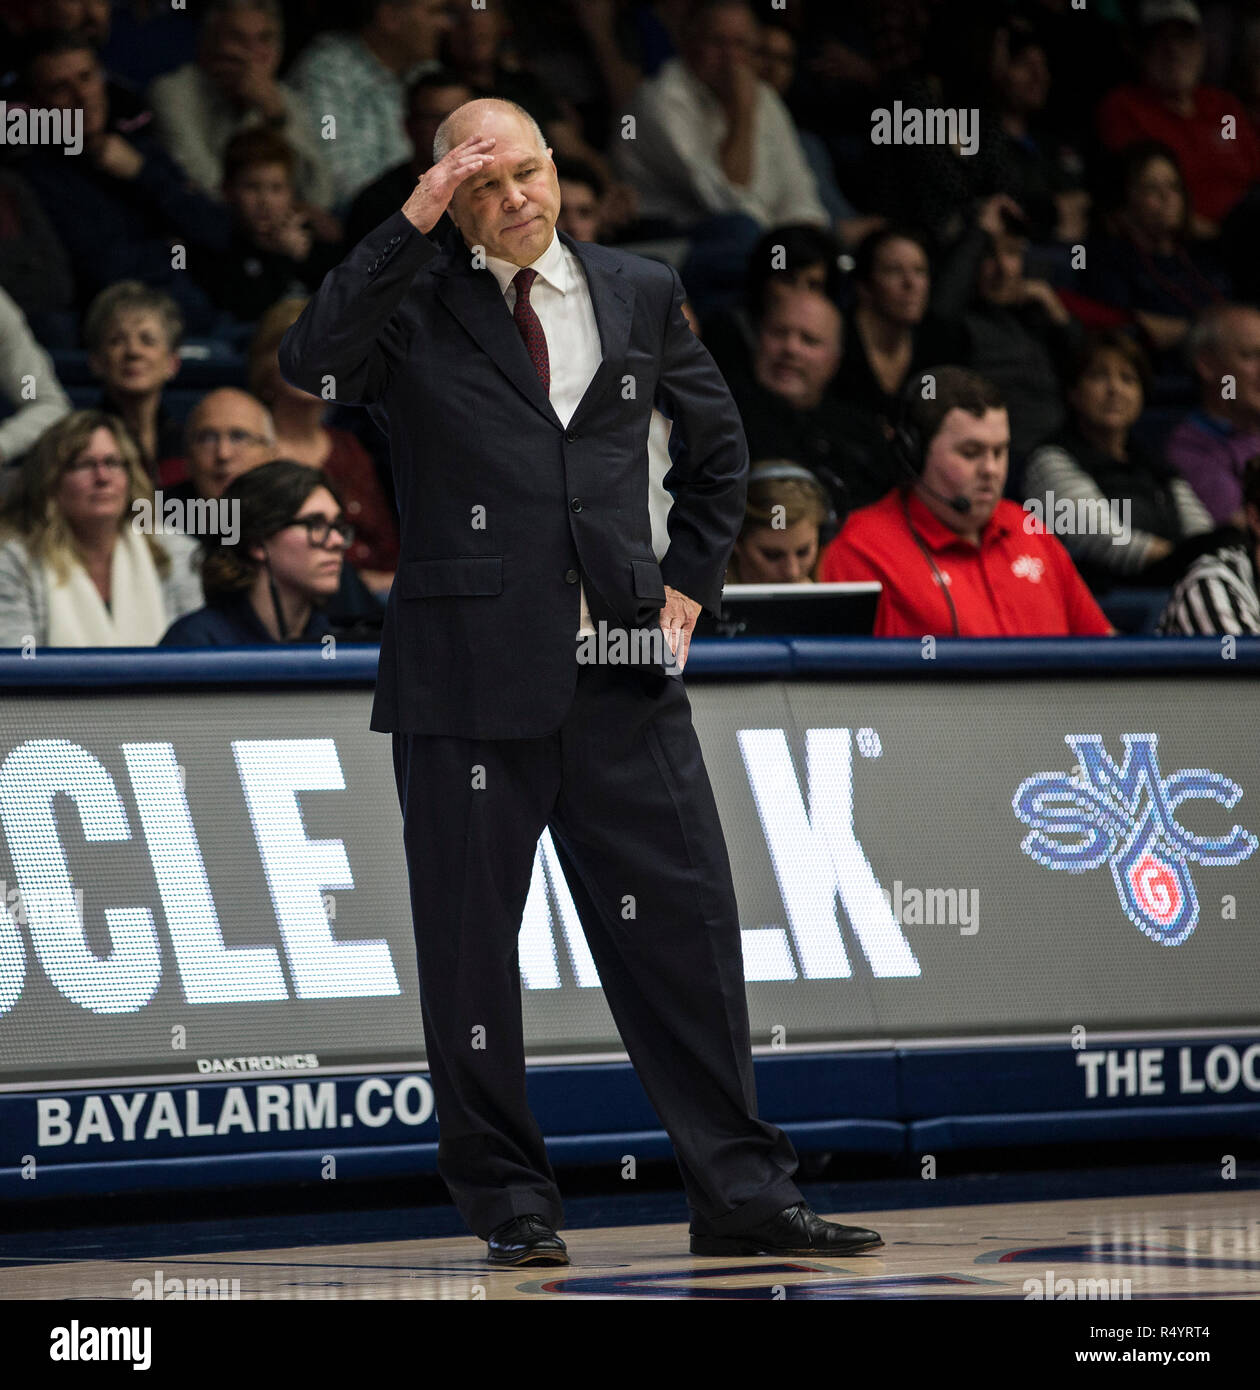 McKeon Pavilion Moraga Calif, USA. 28th Nov, 2018. U.S.A. St. Mary's head coach Randy Bennett during the NCAA Men's Basketball game between UC Irvine Anteaters and the Saint Mary's Gaels 75-80 lost at McKeon Pavilion Moraga Calif. Thurman James/CSM/Alamy Live News Stock Photo